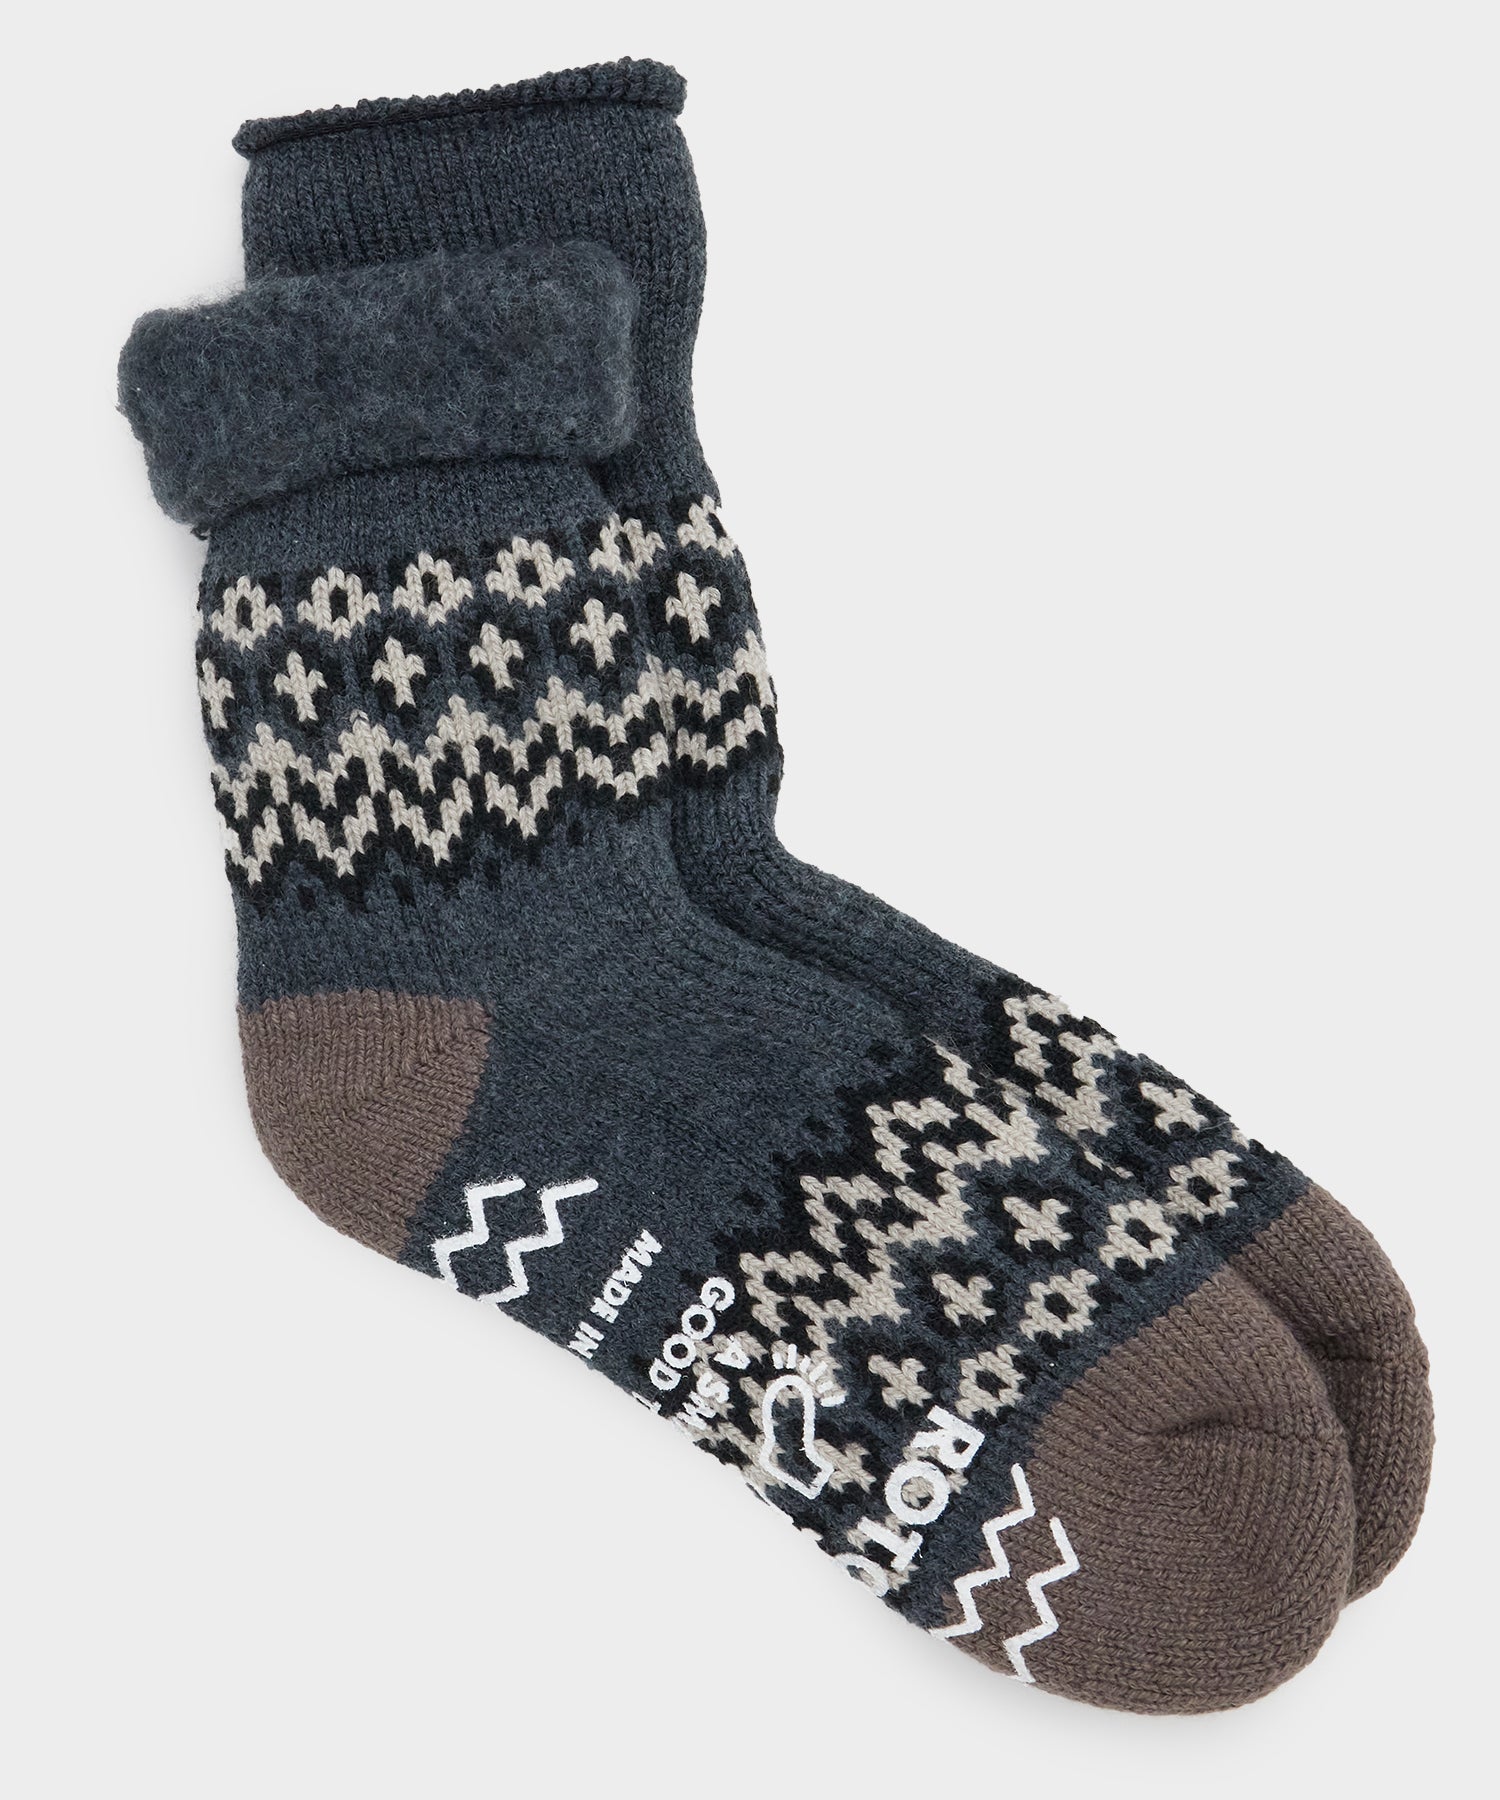 Rototo Comfy Room Nordic Socks in Charcoal